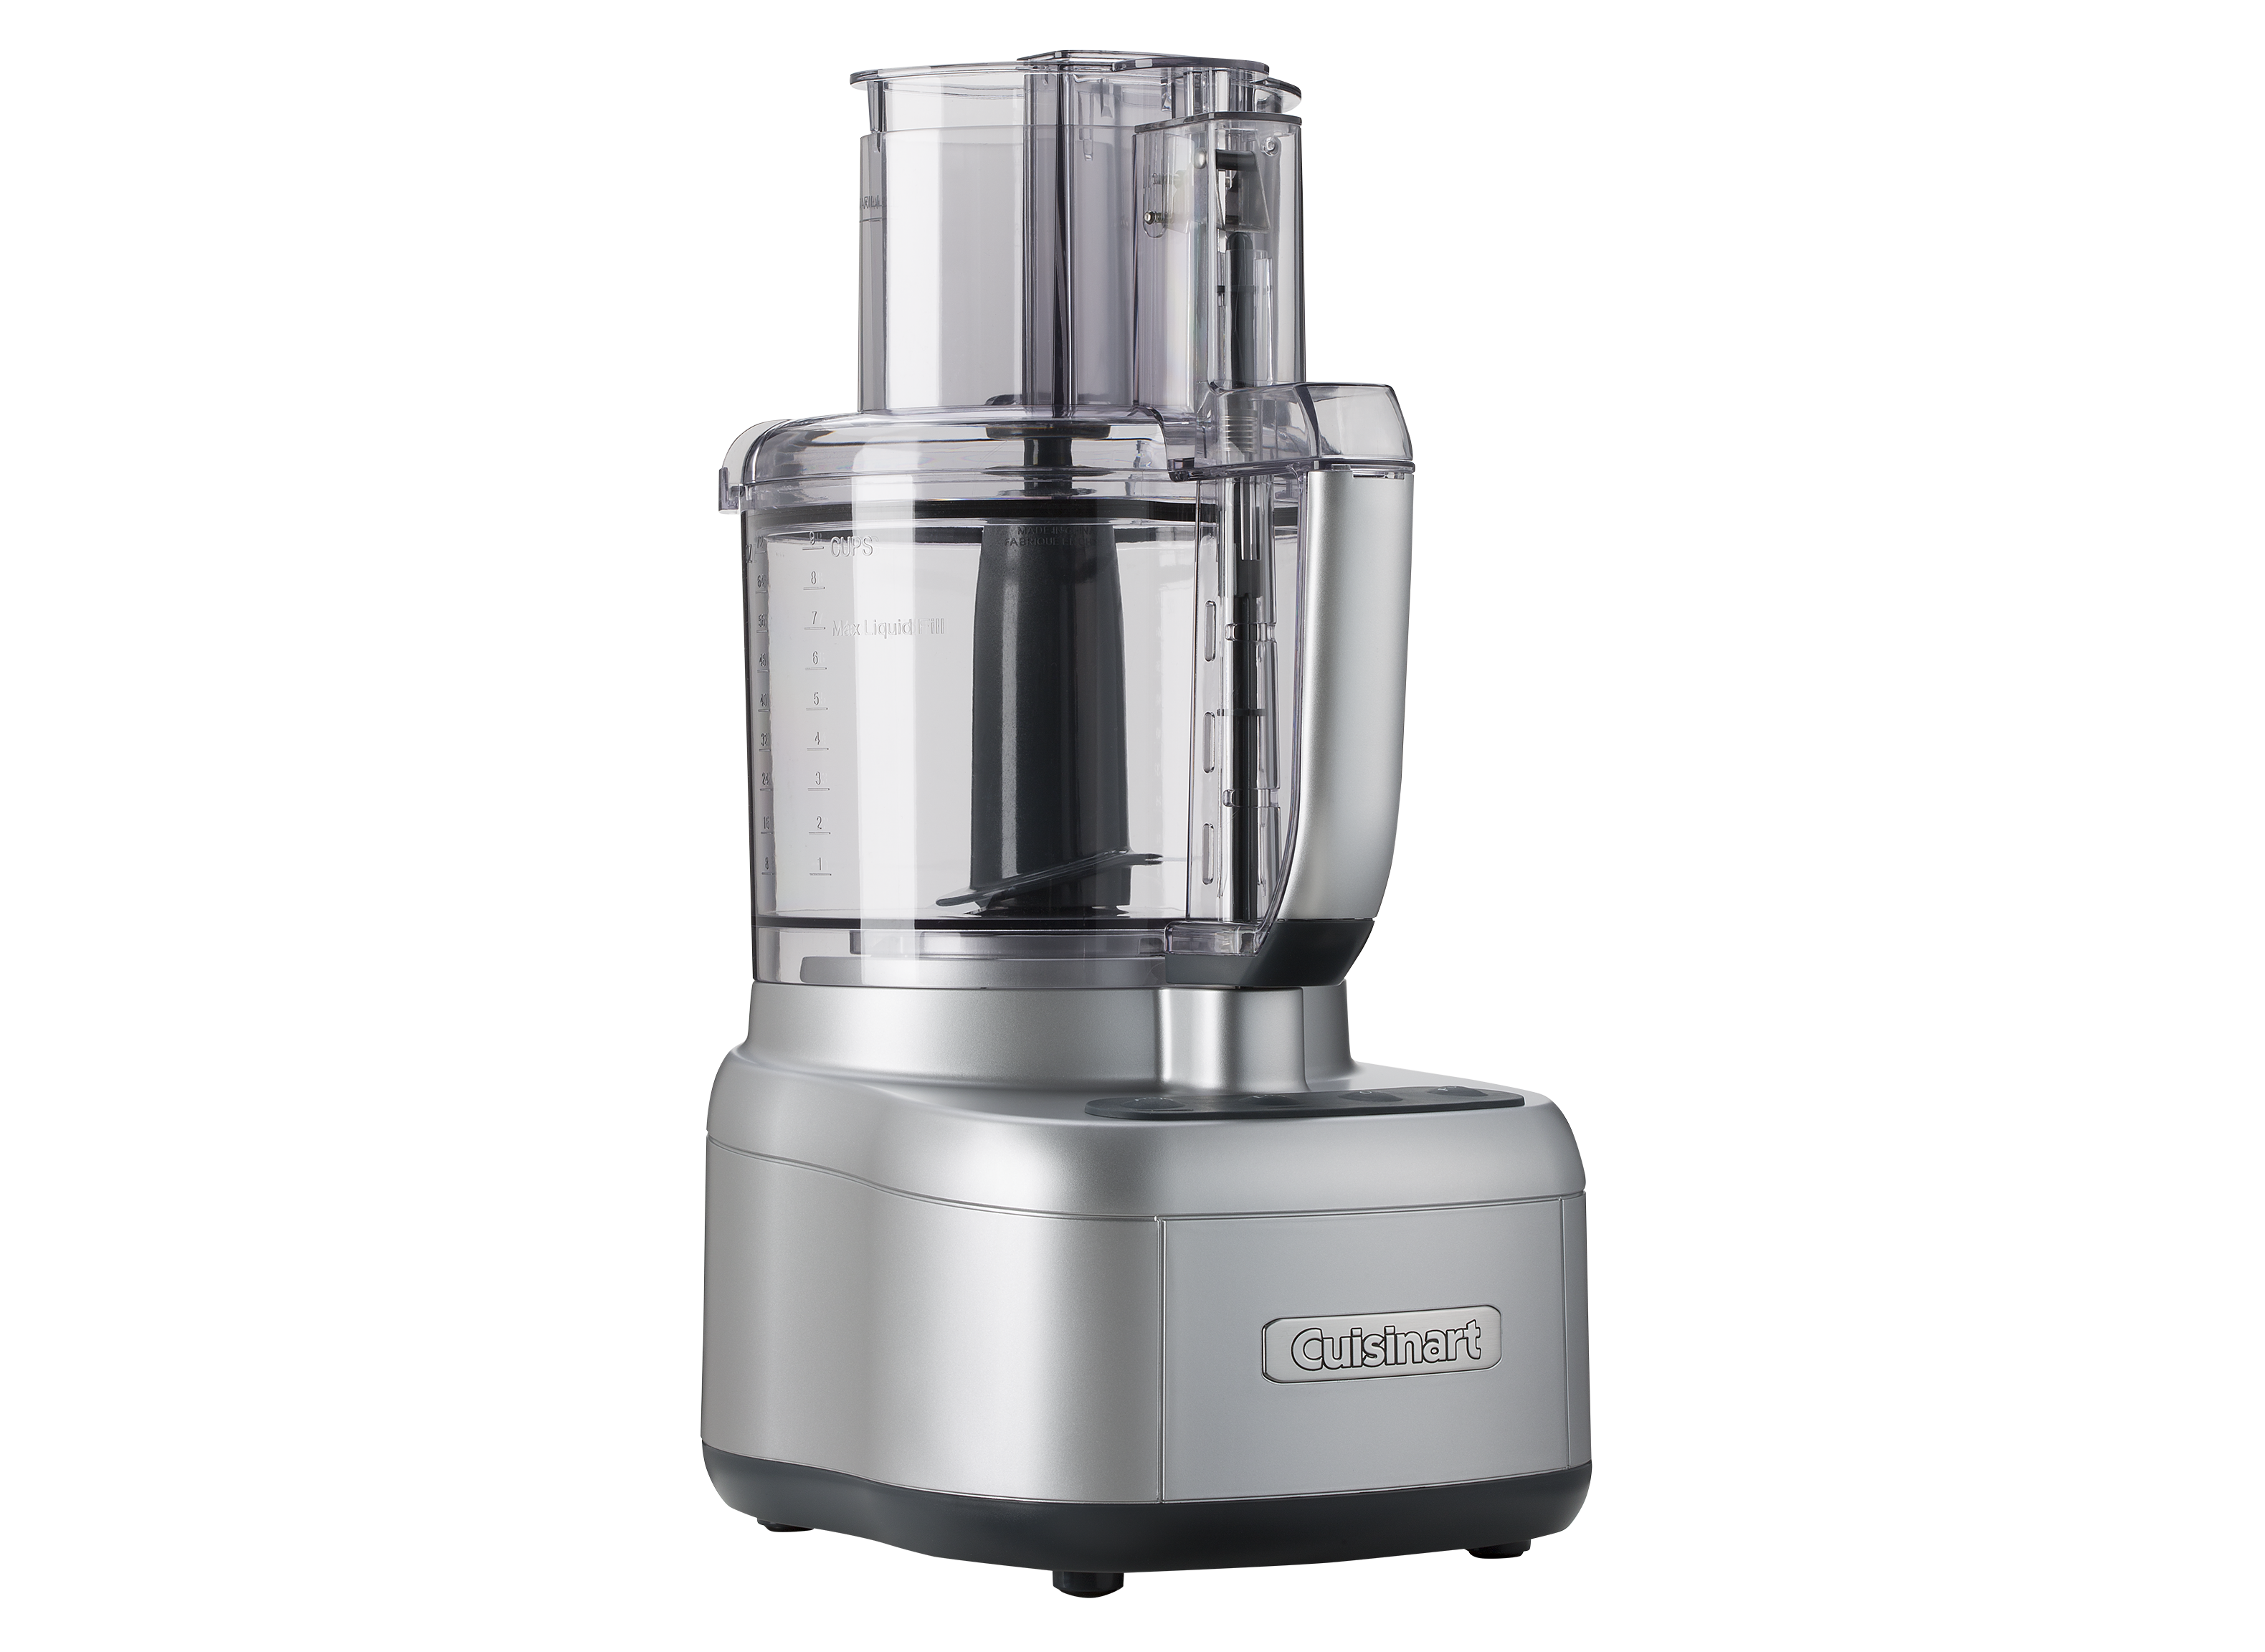 How To Use Cuisinart 11 Cup Food Processor